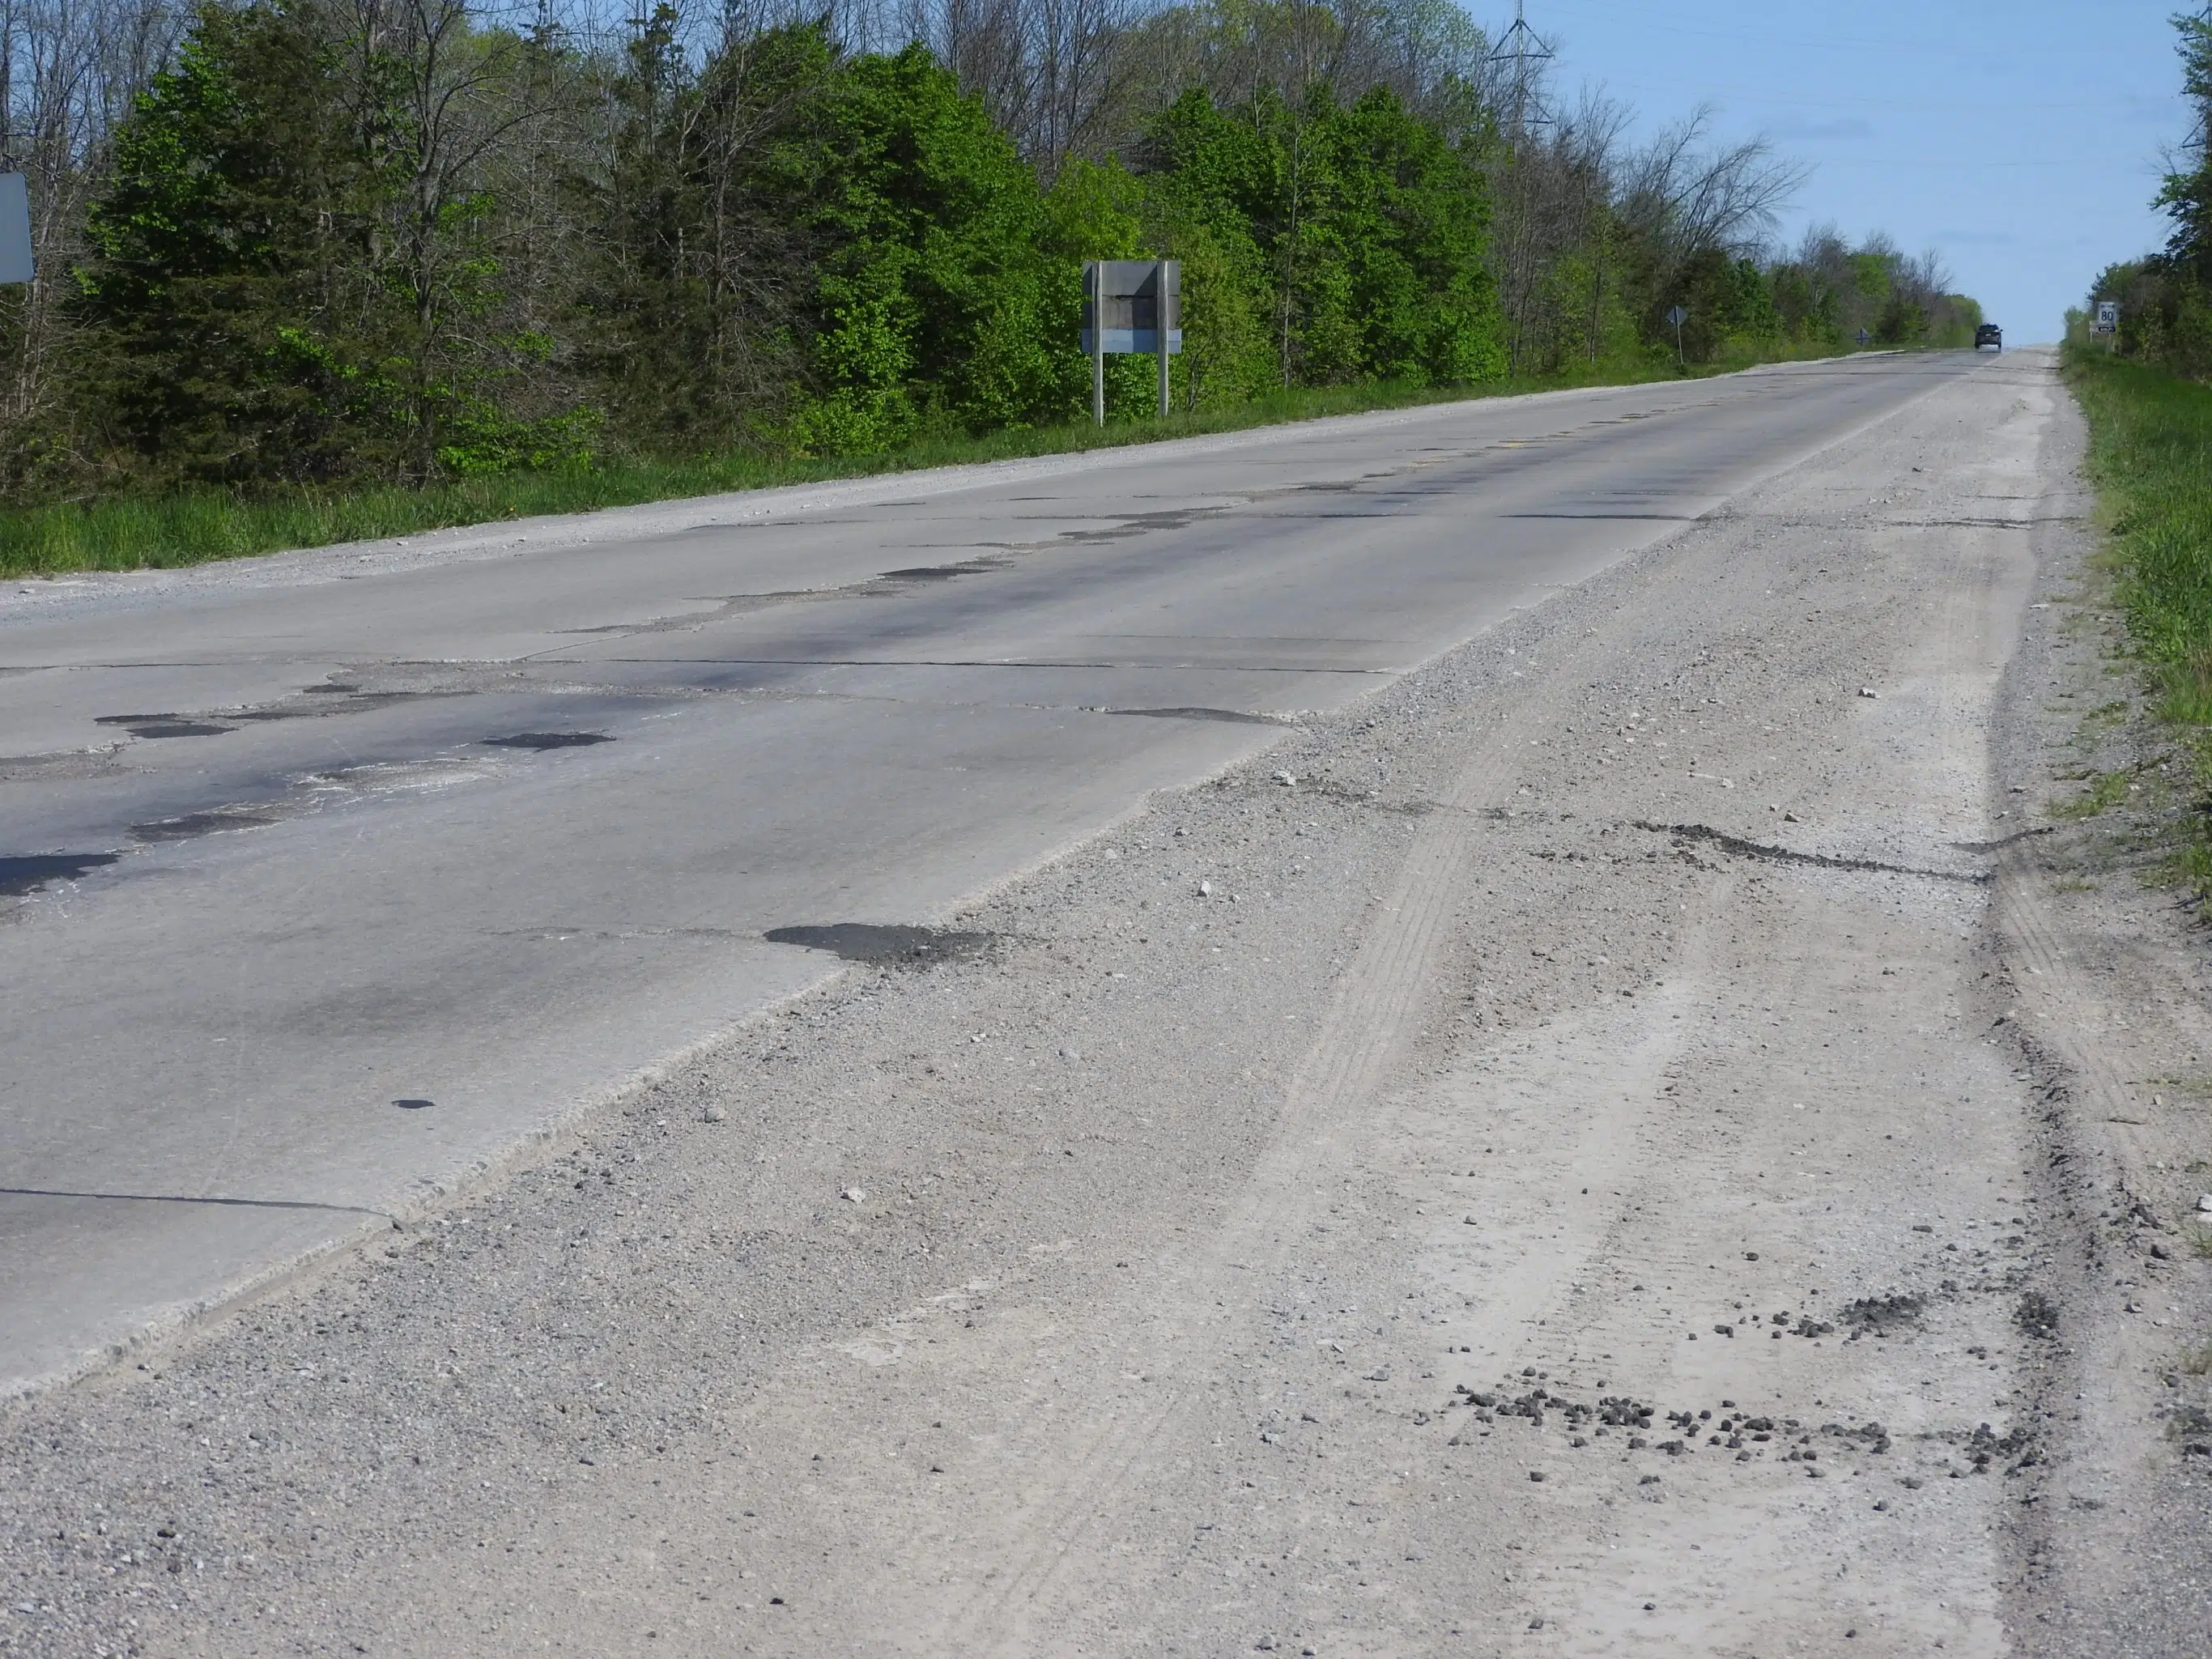 Benefit Fund established for County Road 49 reconstruction